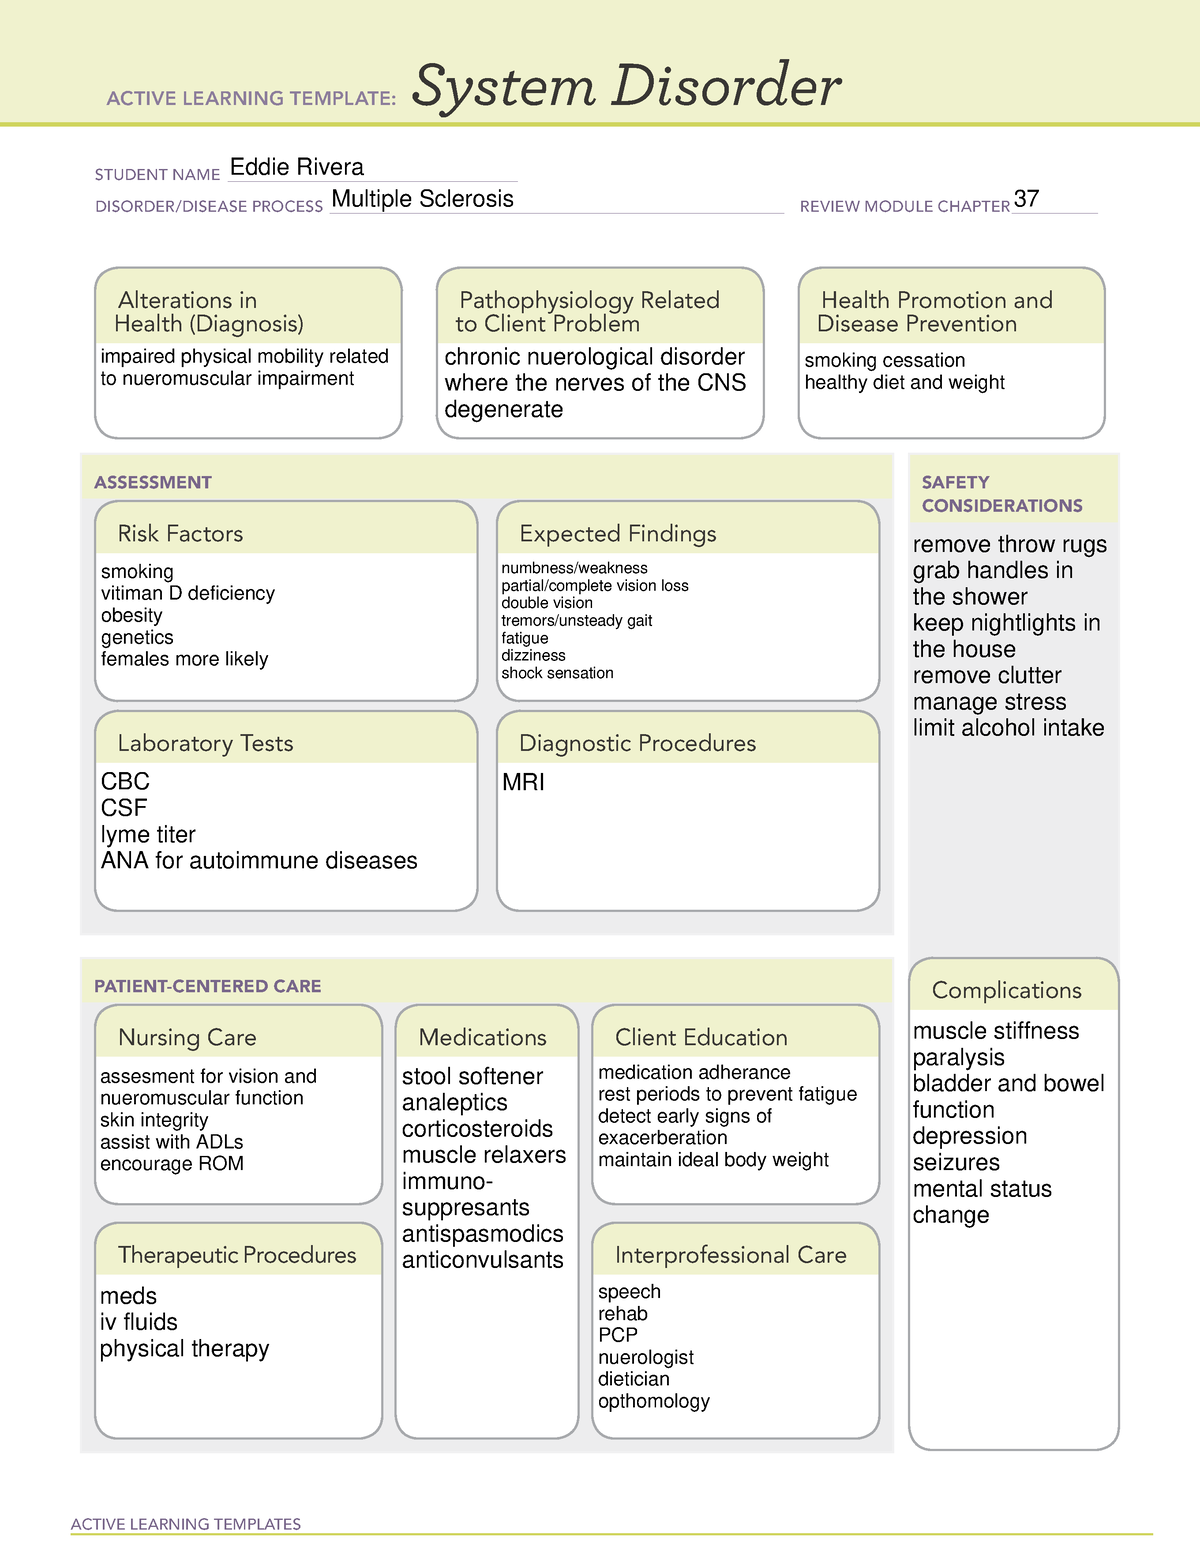 ati-systems-disorder-template-ms-active-learning-templates-system